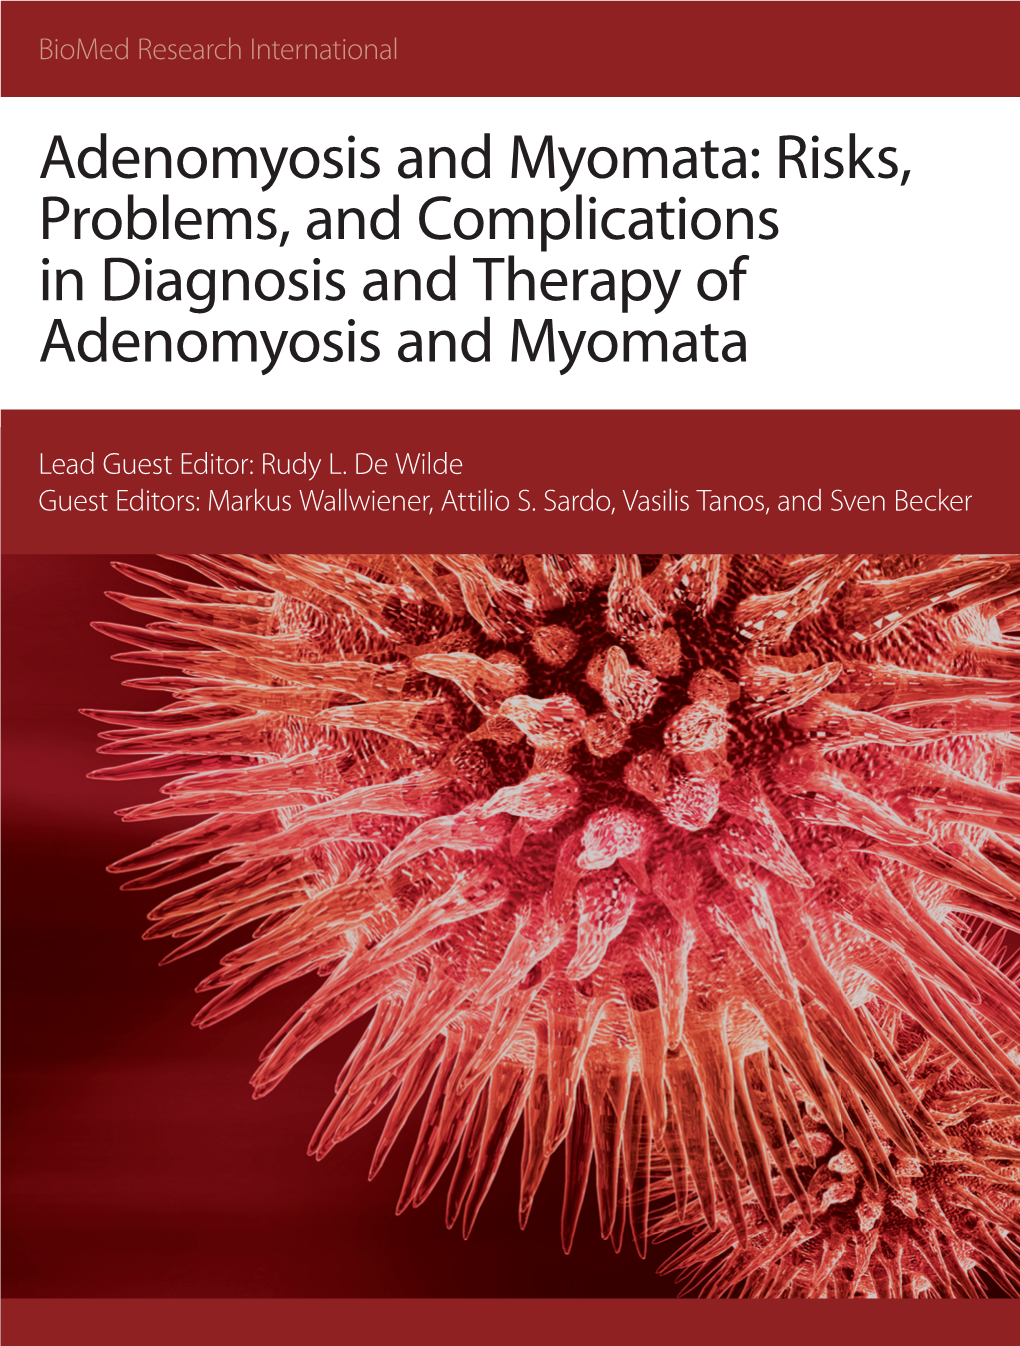 Risks, Problems, and Complications in Diagnosis and Therapy of Adenomyosis and Myomata